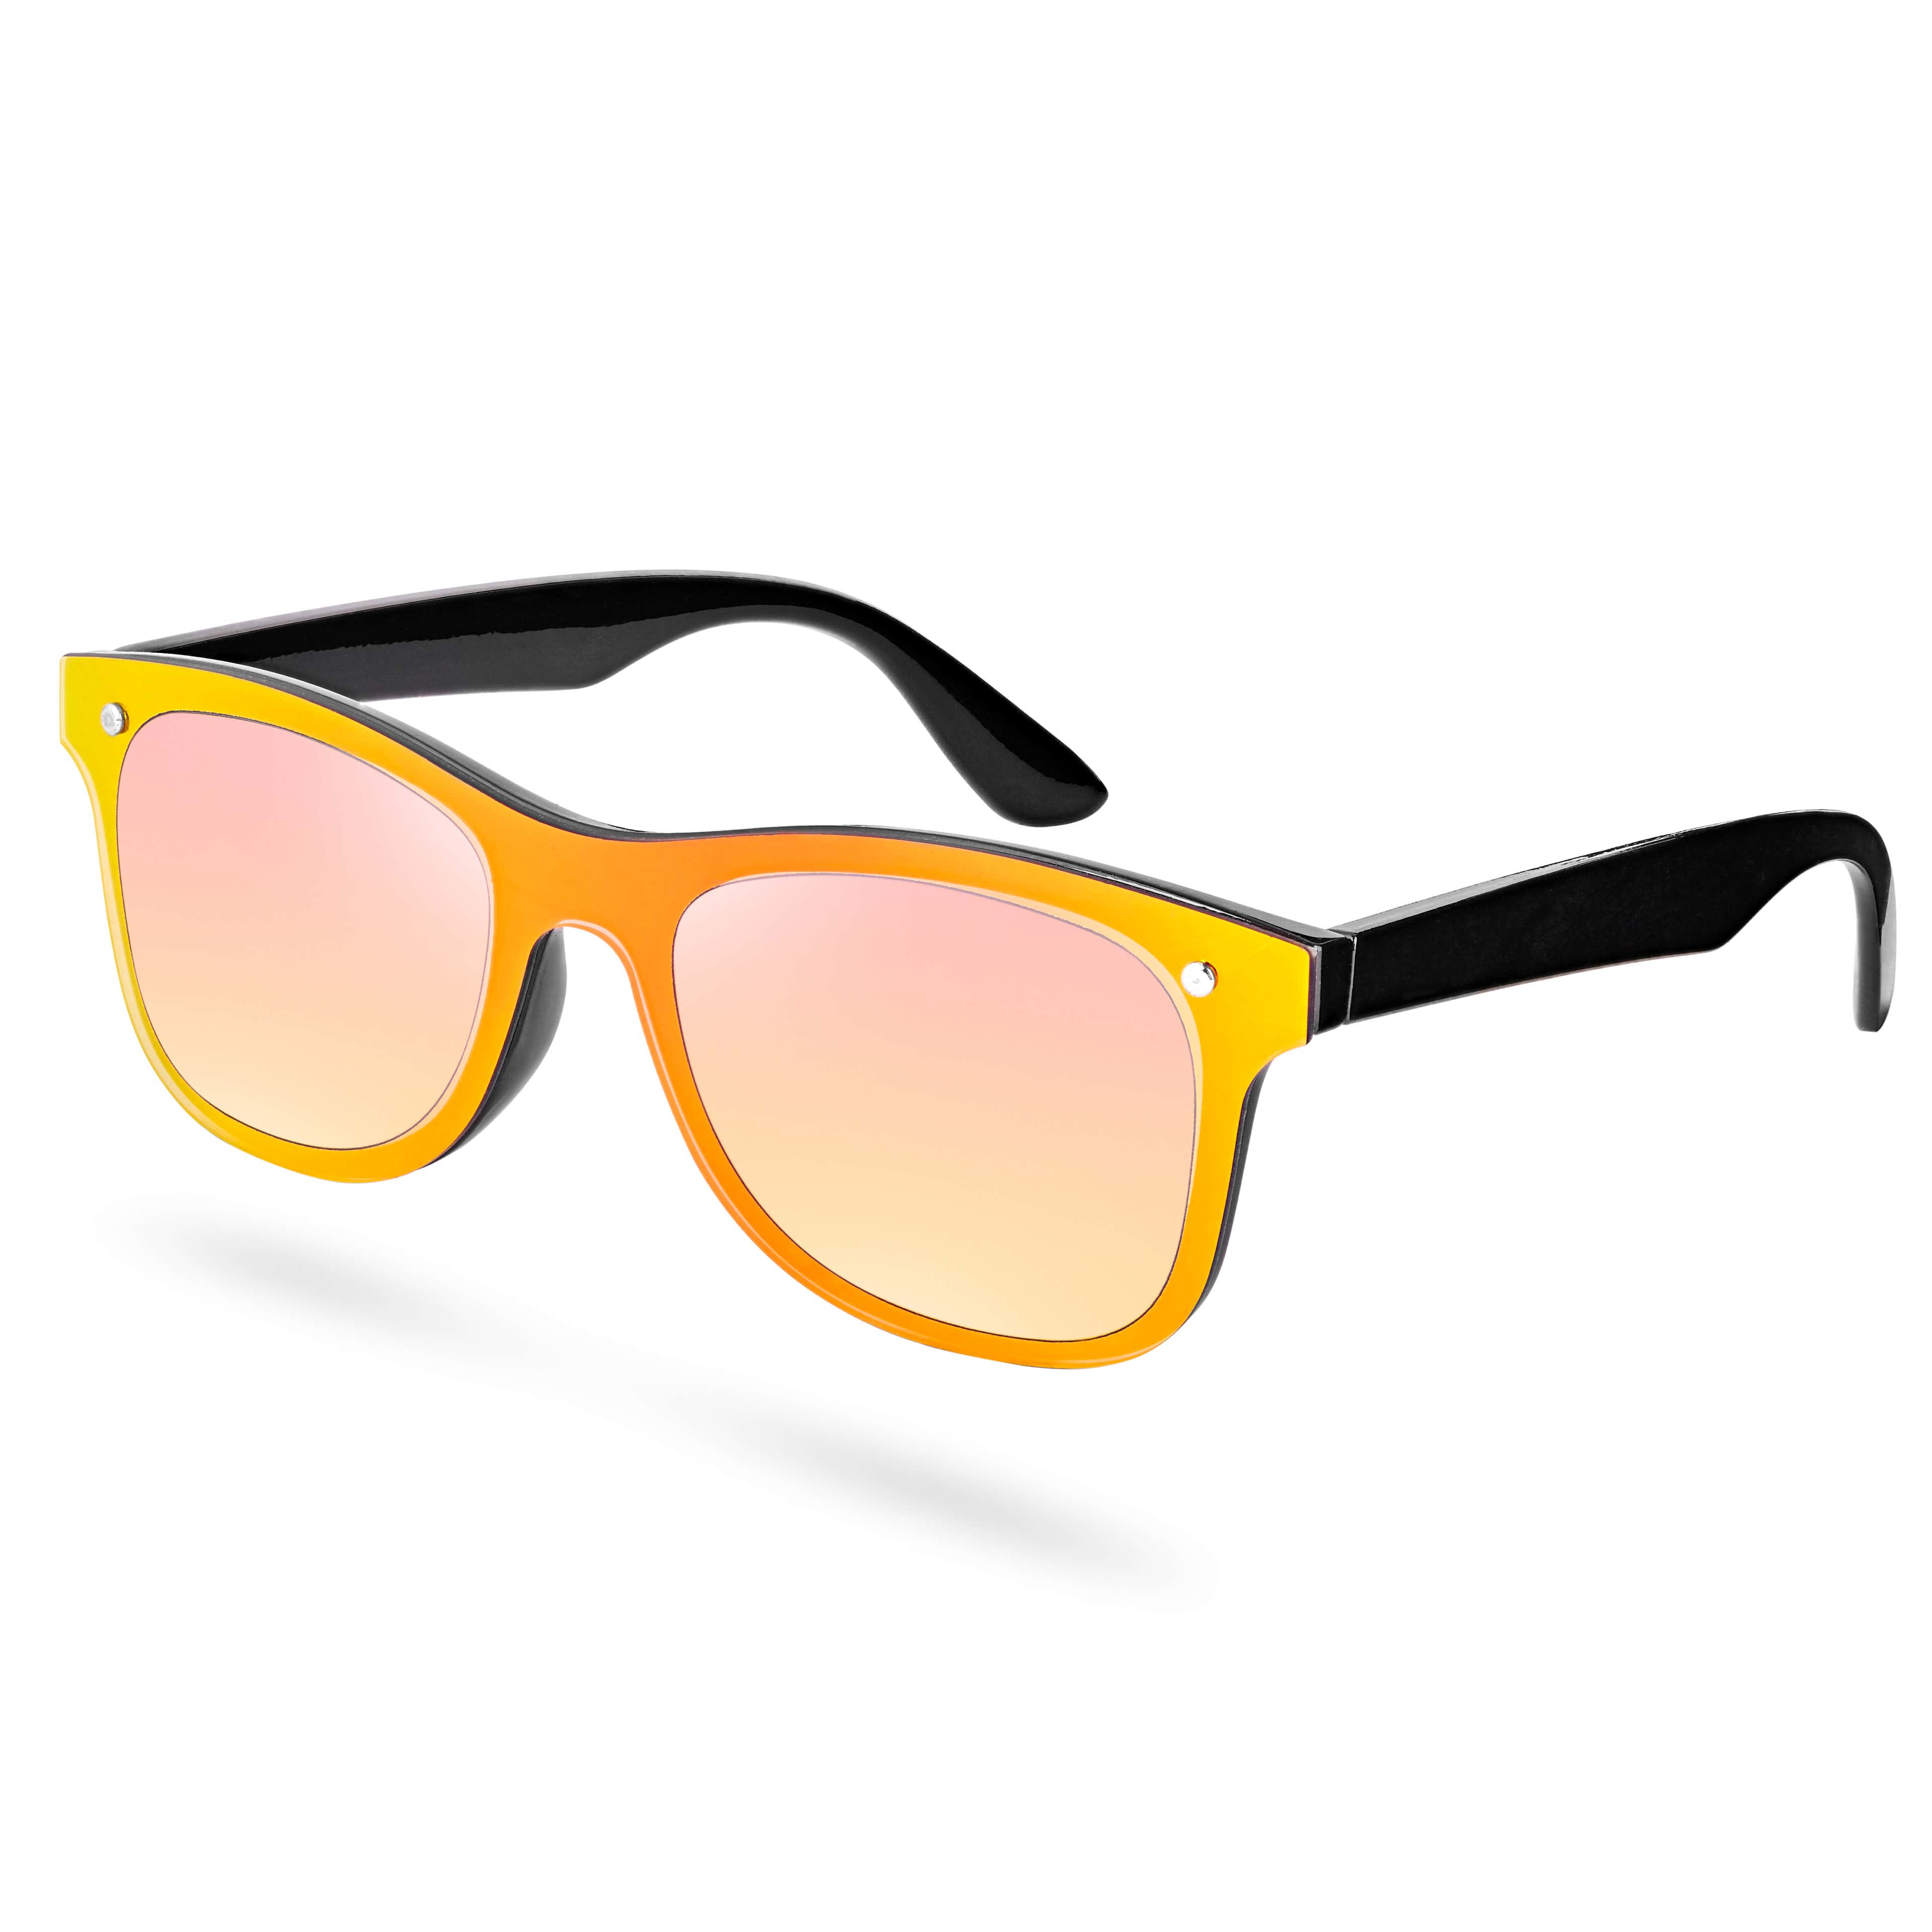 Yellow and Black Frame Sunglasses